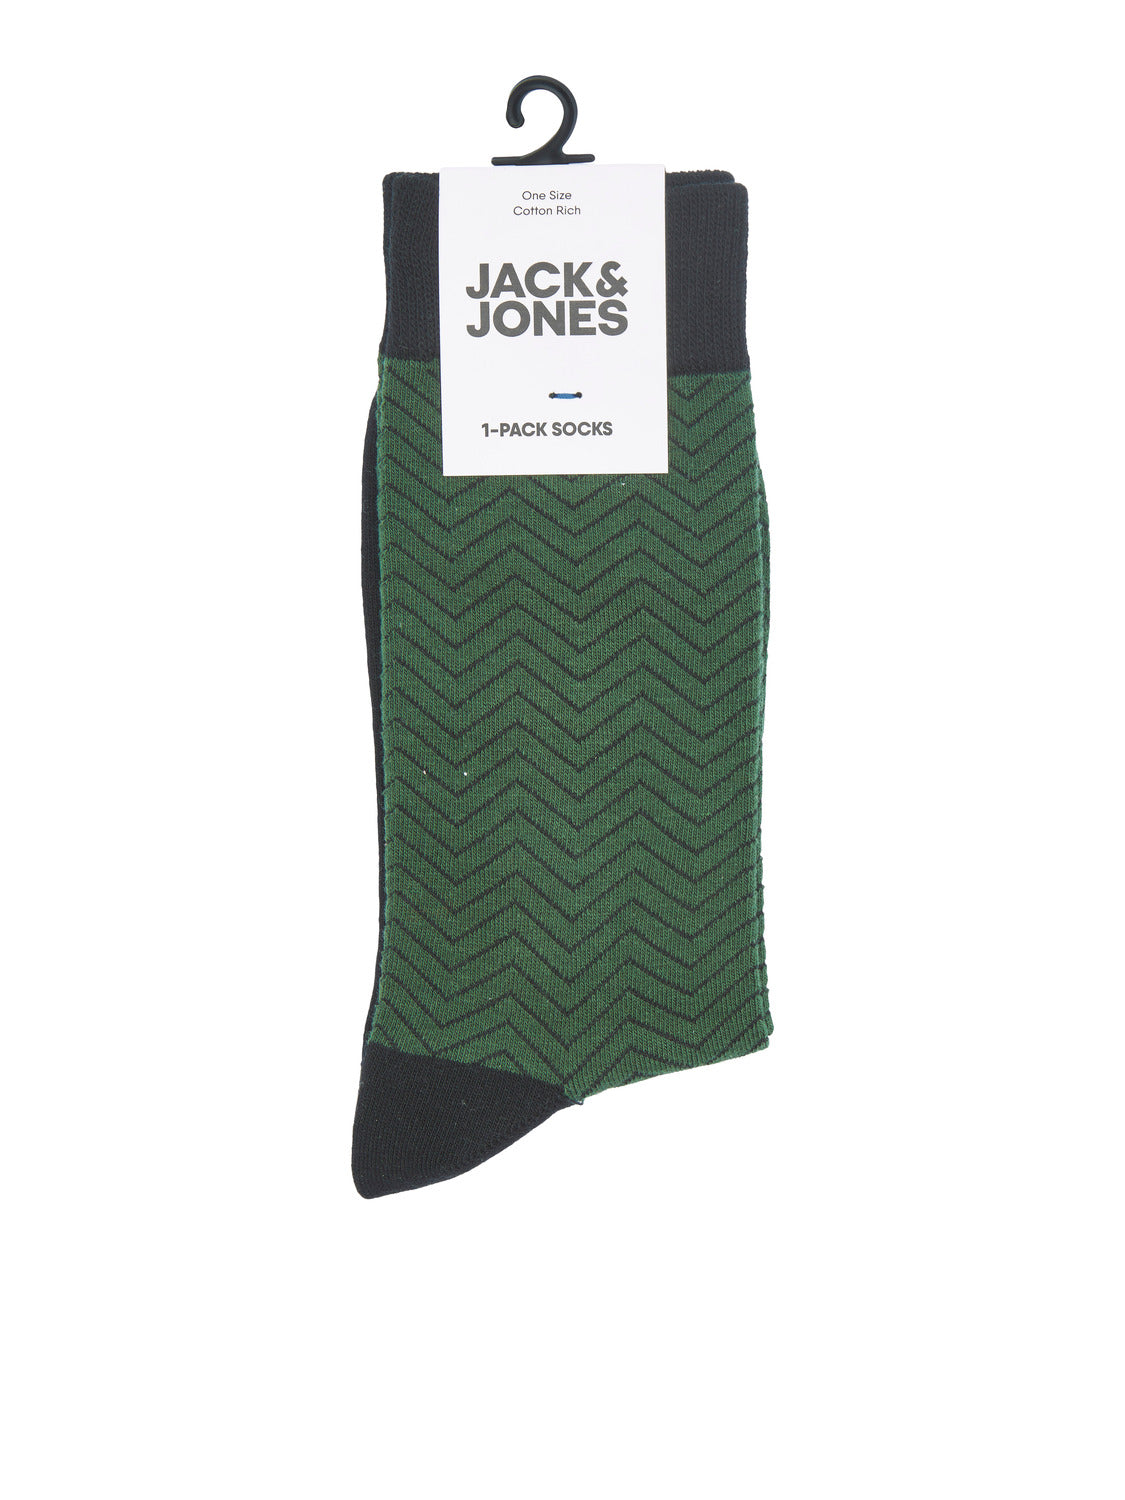 JACGOVER Socks - Sycamore